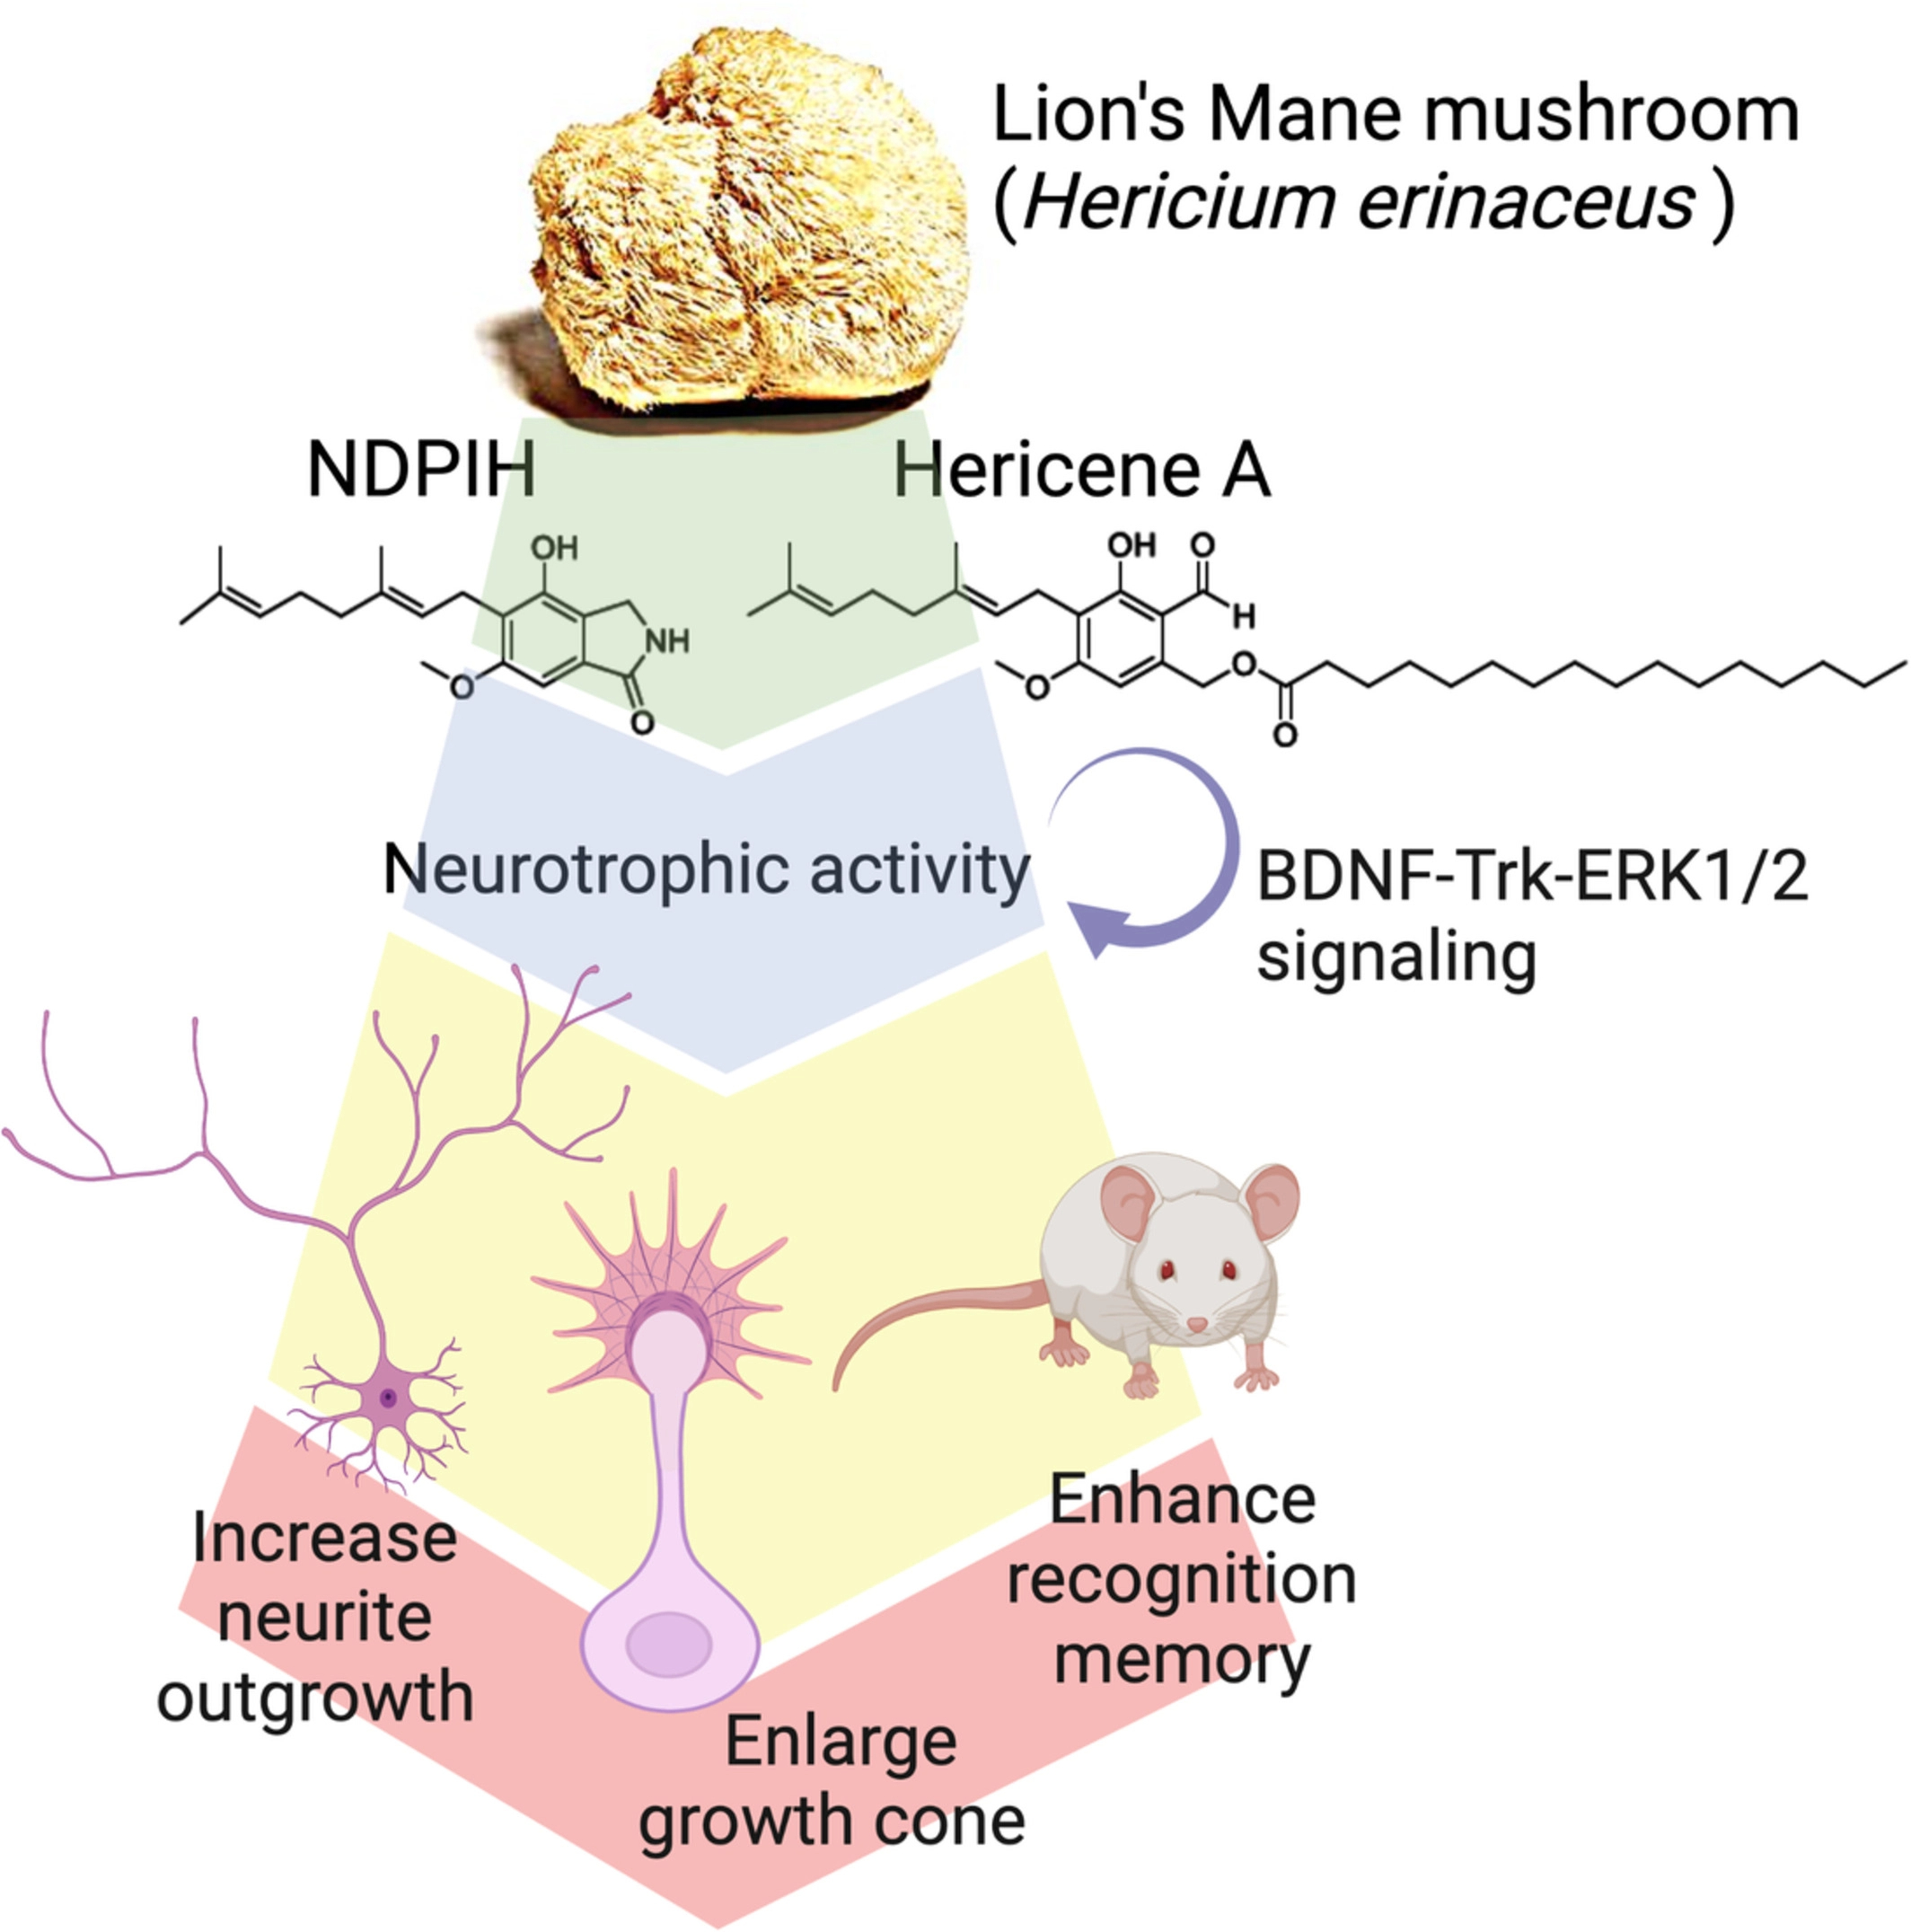 a simple diagram. at the top is a picture of lion's mane mushroom with a large arrow coming out below it, extending to the bottom of the diagram. the next stage features chemical diagrams of NDPIH and Hericene A. below that is the text "neutrophic activity." below that are simple illustrations of brain cells like neurite, and a mouse. the accompanying text reads: "increase neurite outgrowth, enlarge growth cone, enhance recognition memory"